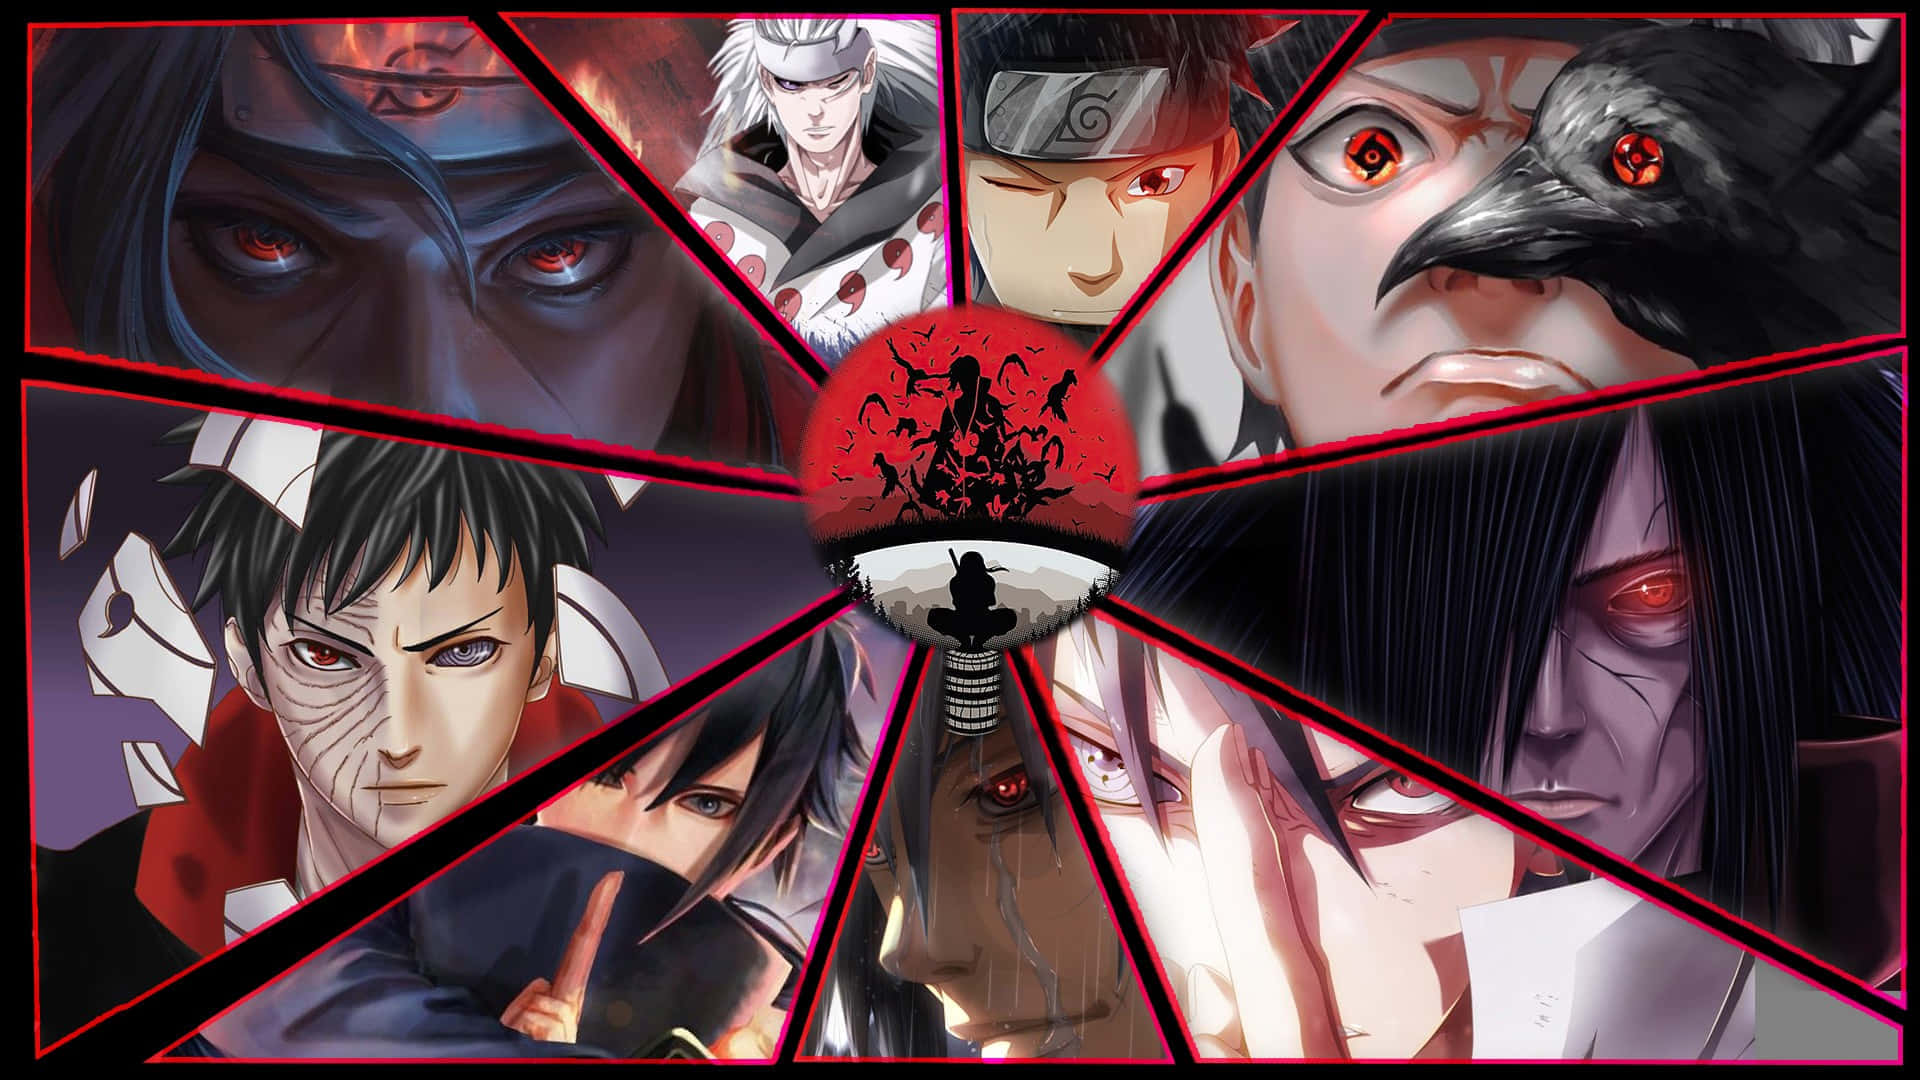 Intricate Mangekyou Sharingan Design In Red And Black Hues Background